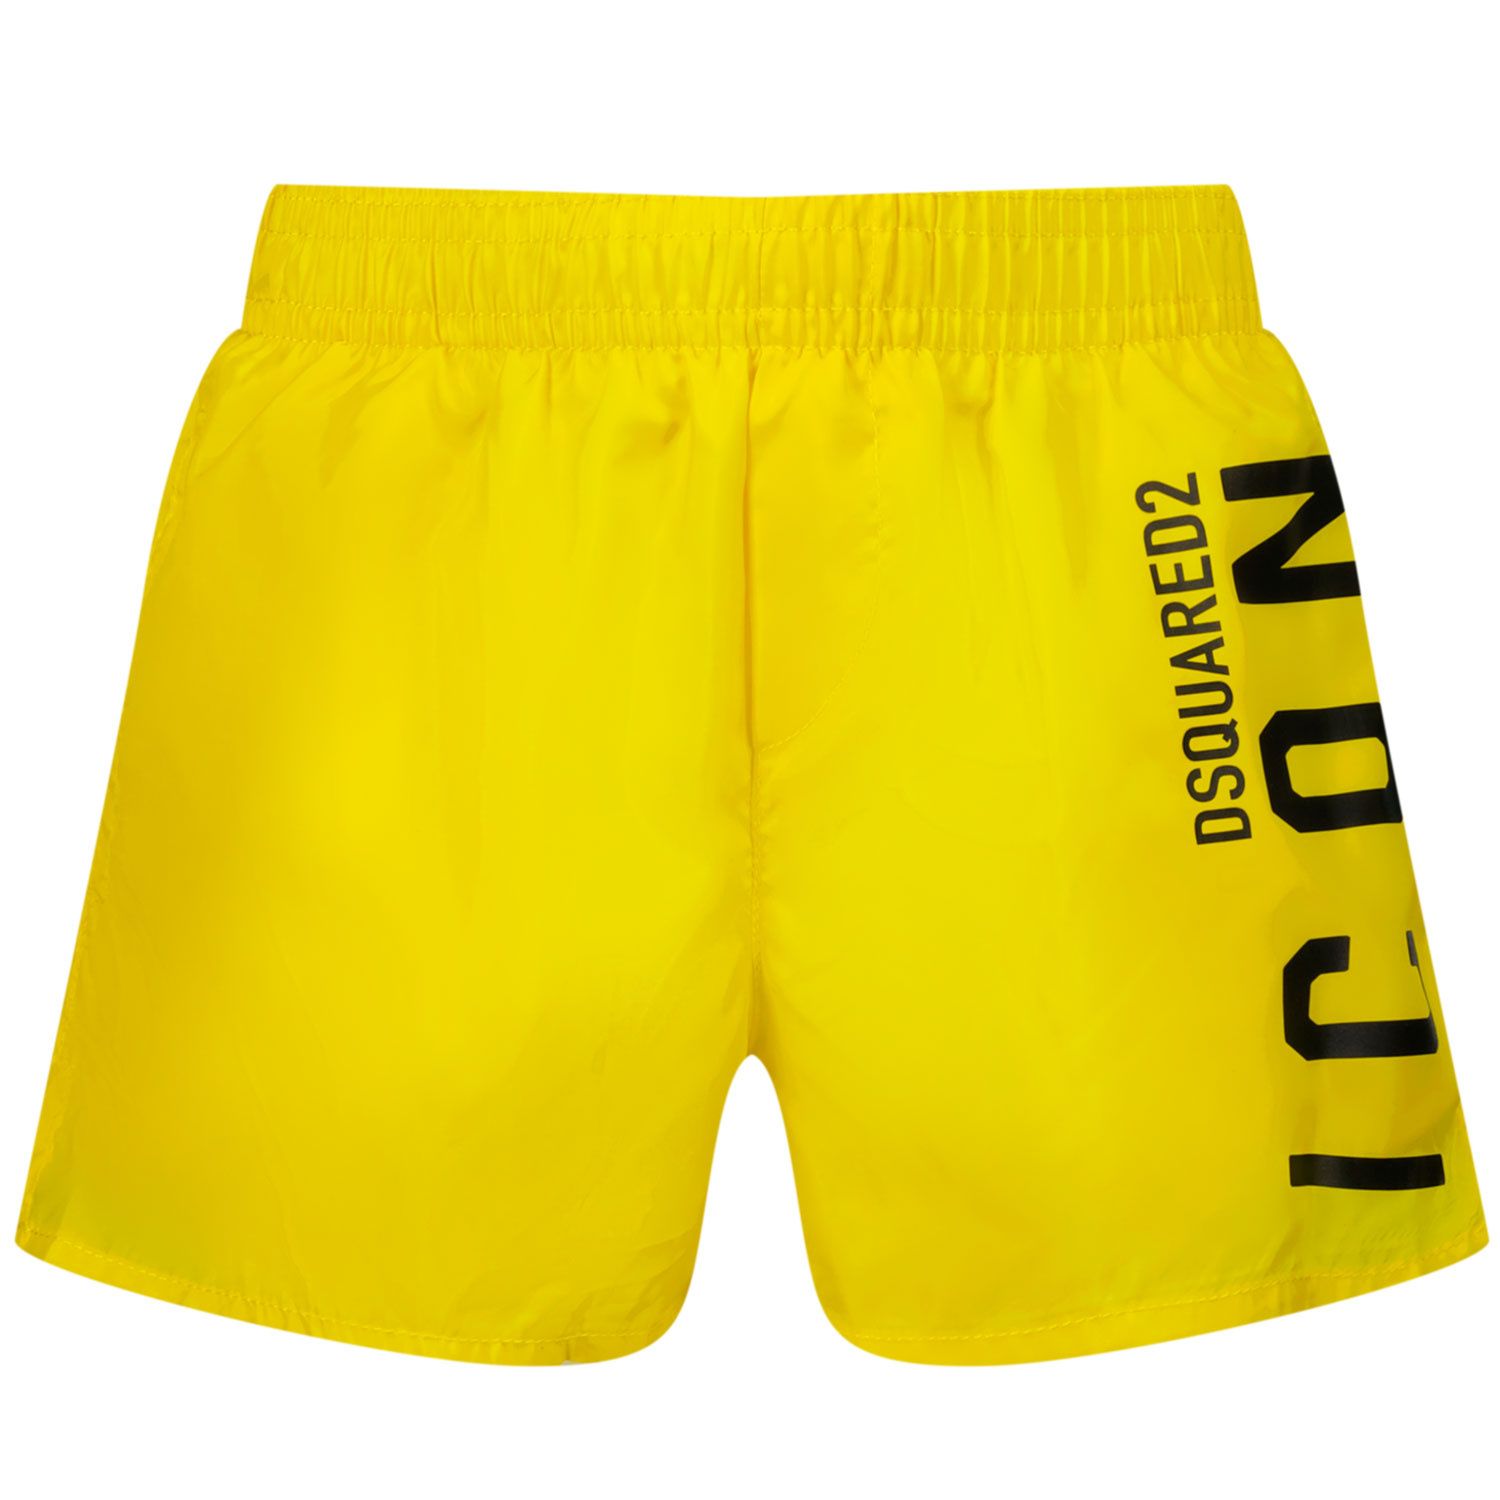 Picture of Dsquared2 DQ1020 baby swimwear yellow